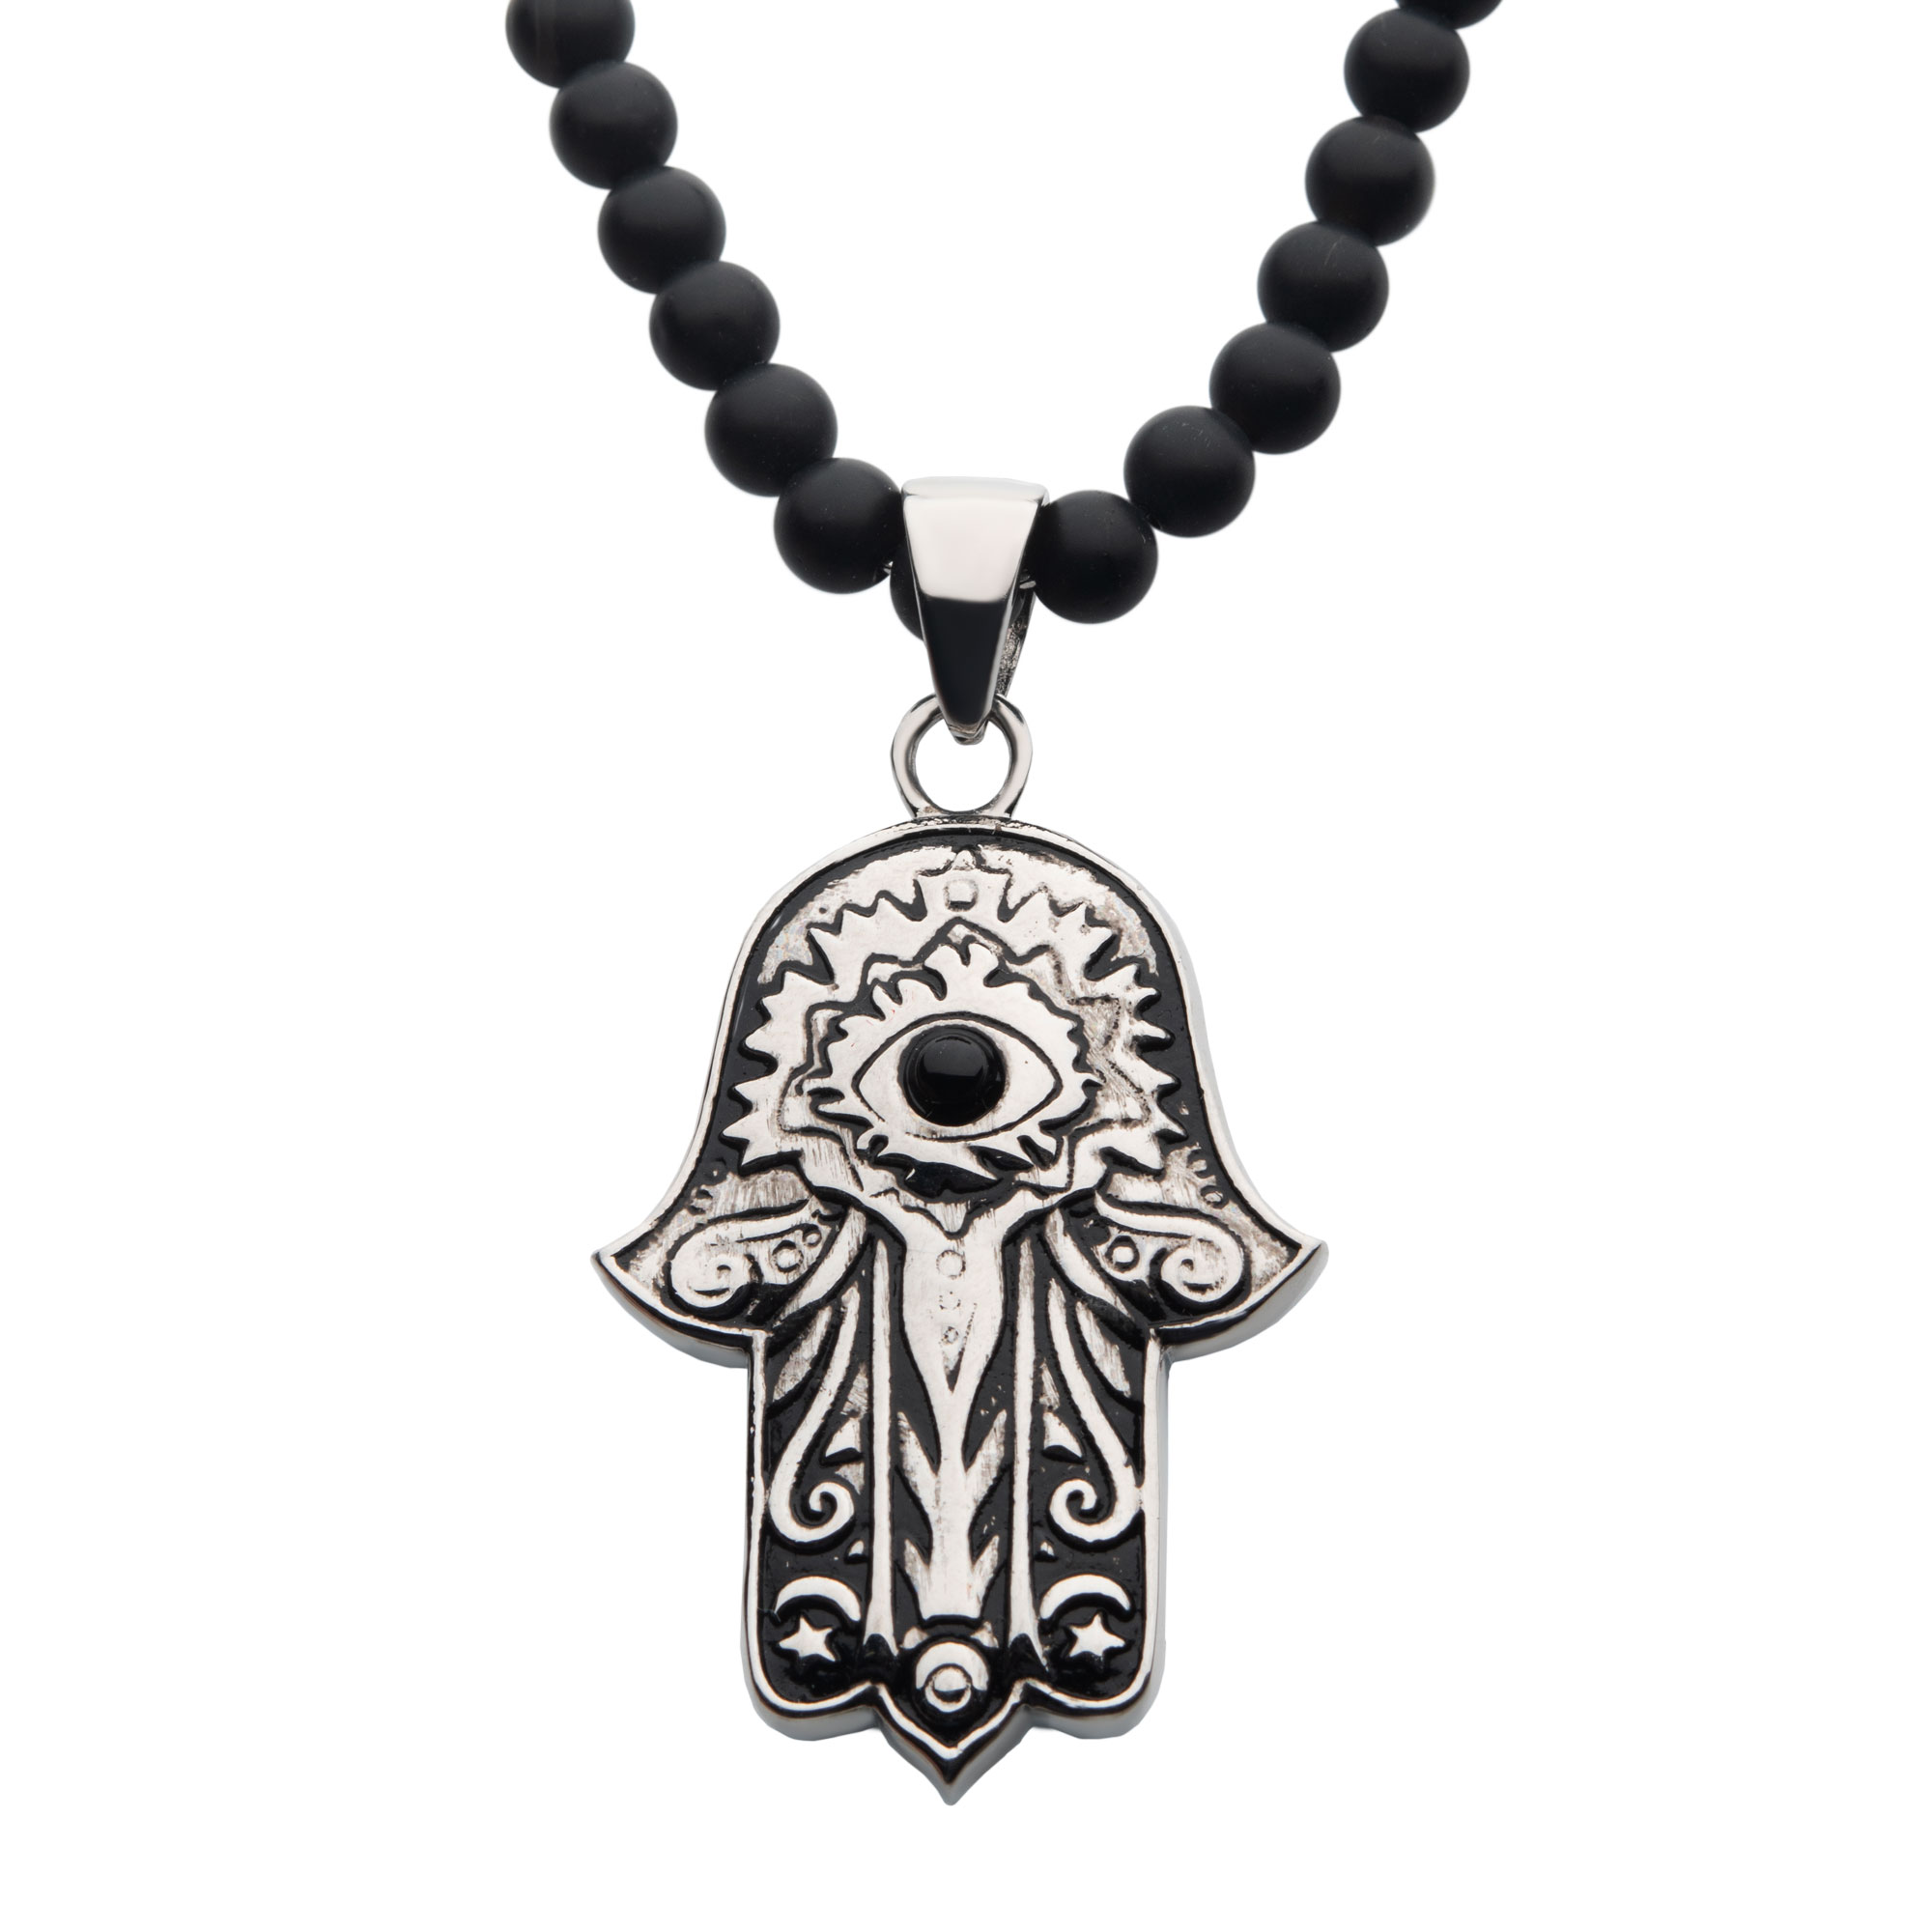 Stainless Steel with Centerpiece Black Agate Stone Hamsa Pendant, with Black Agate Stone Bead Necklace Midtown Diamonds Reno, NV